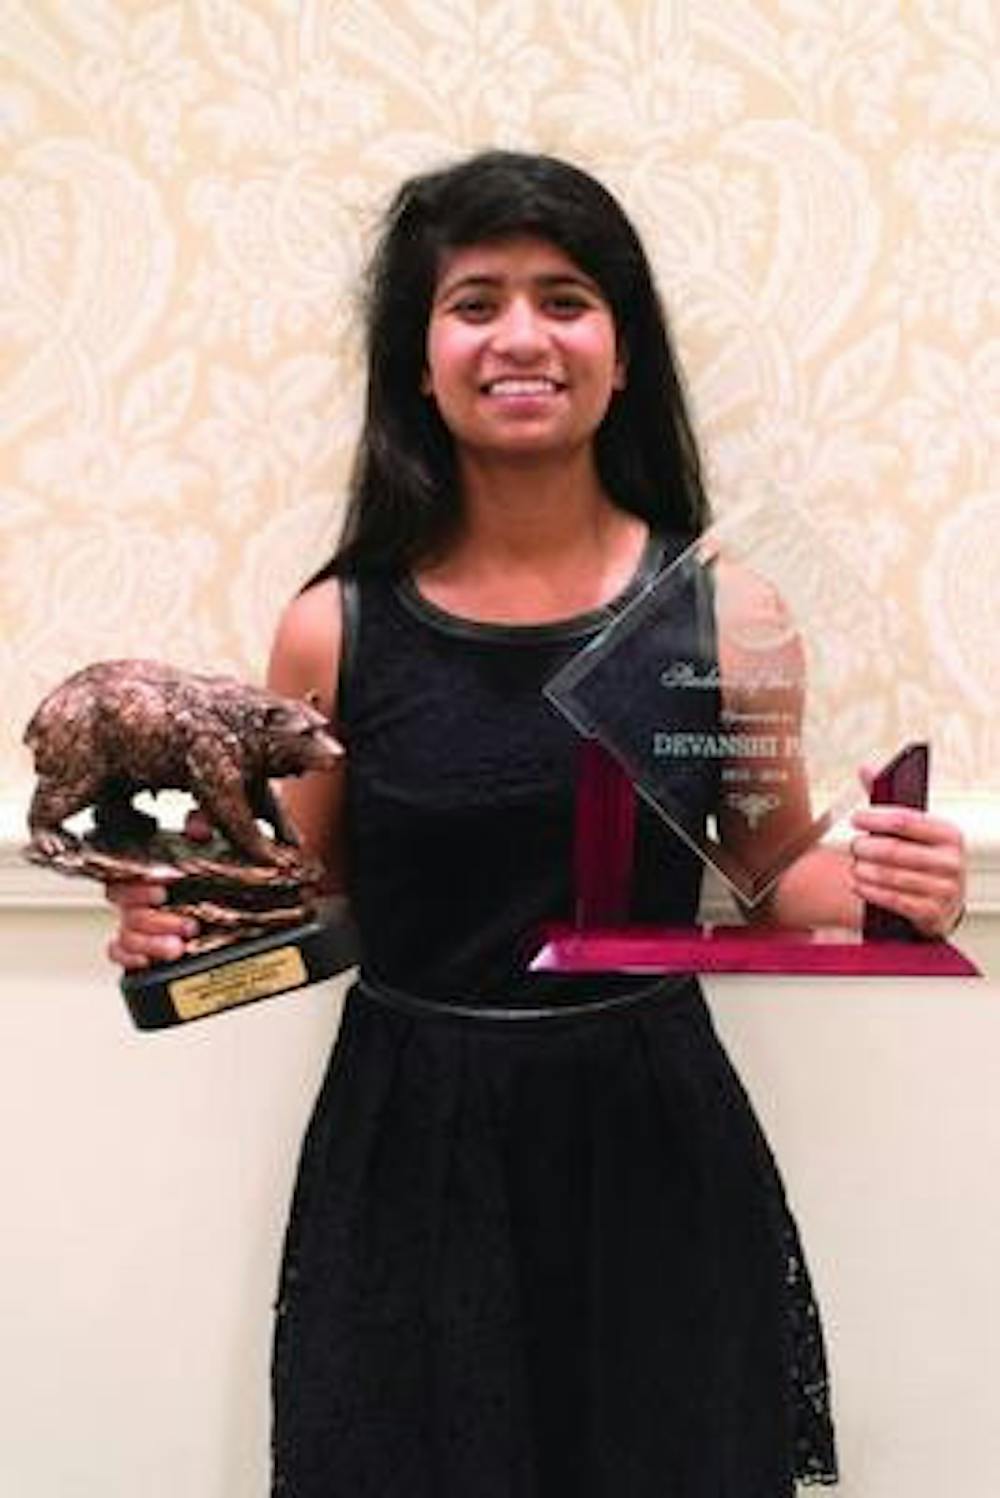 
Devanshi Patel received the 2016 SGA "Student of the Year" Award.